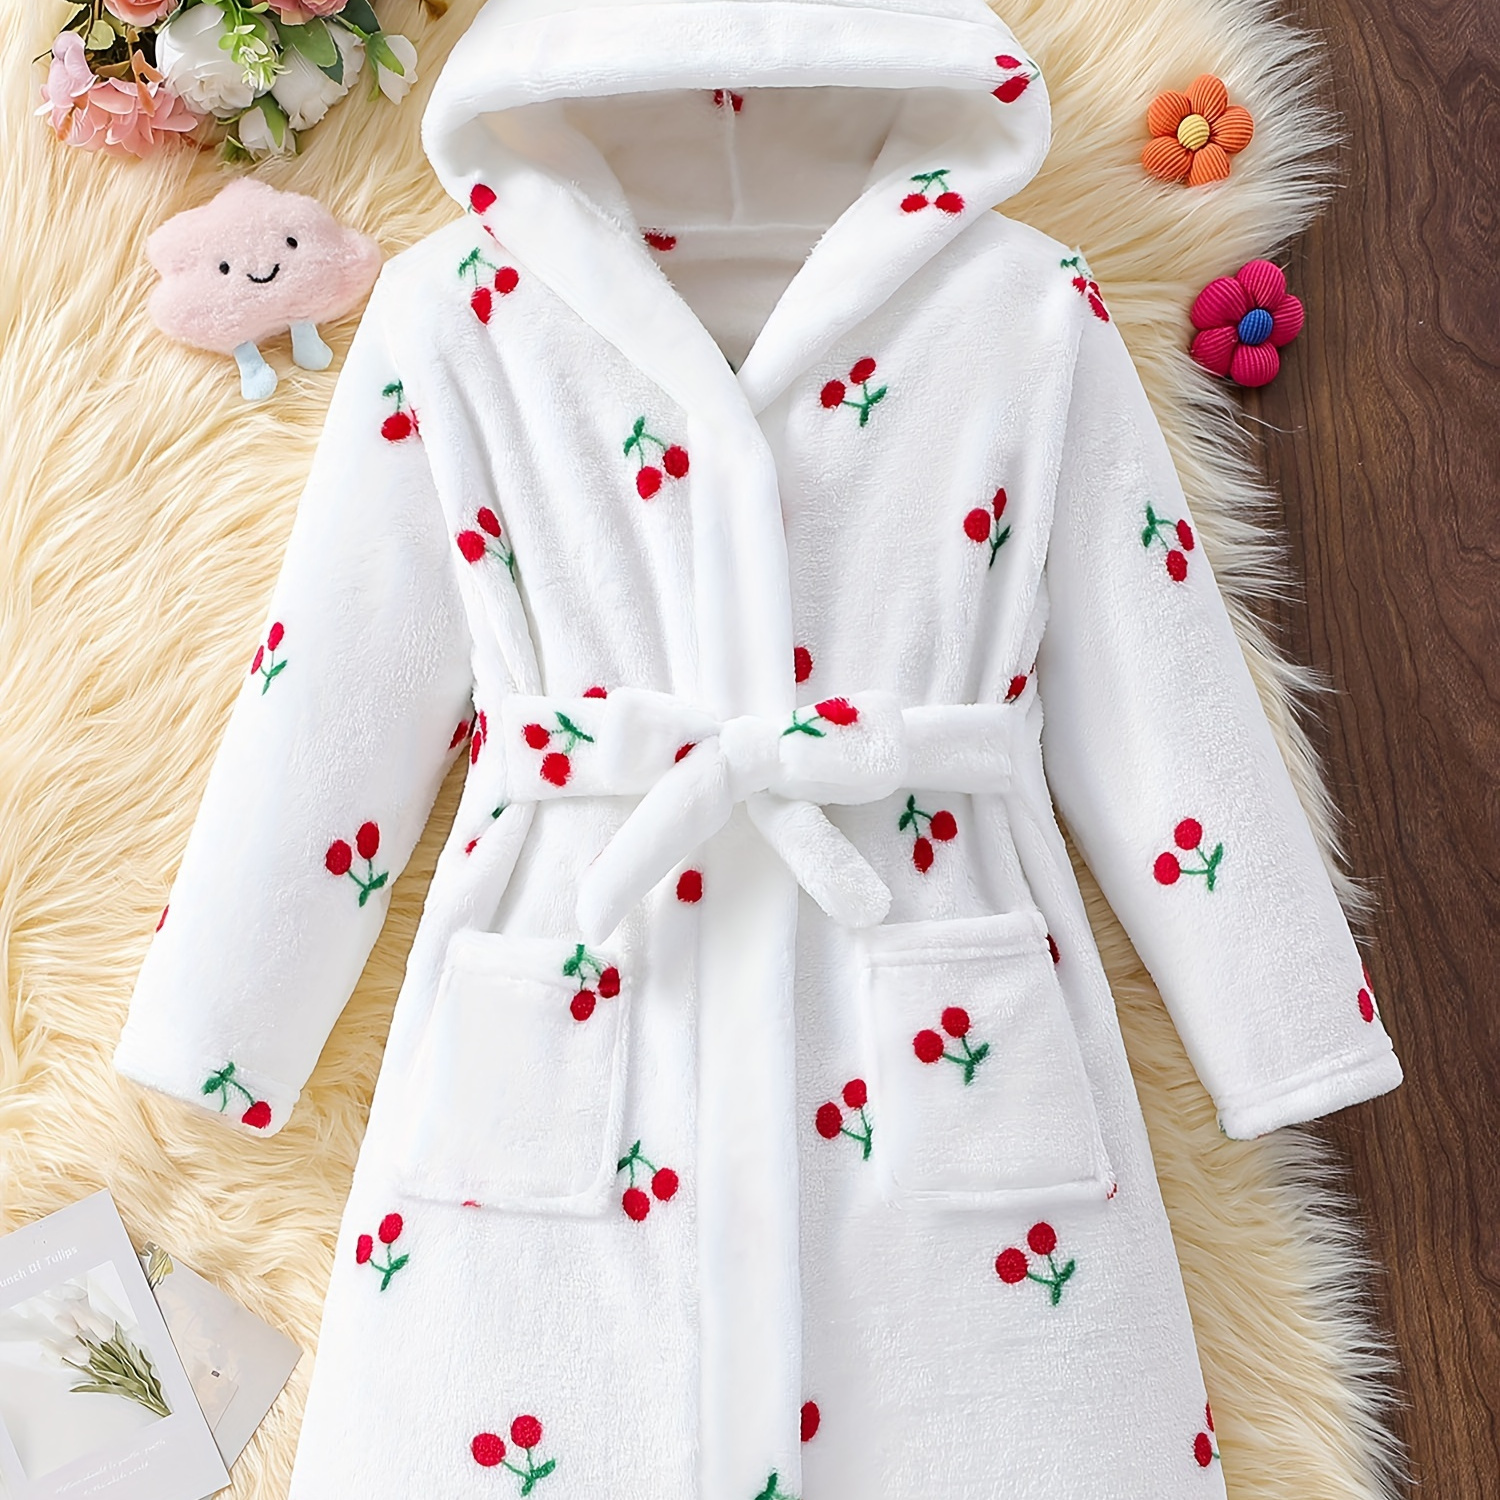 

Girls Robe Soft Warm Hooded Bathrobe With Blet Cherry Pattern For Gift